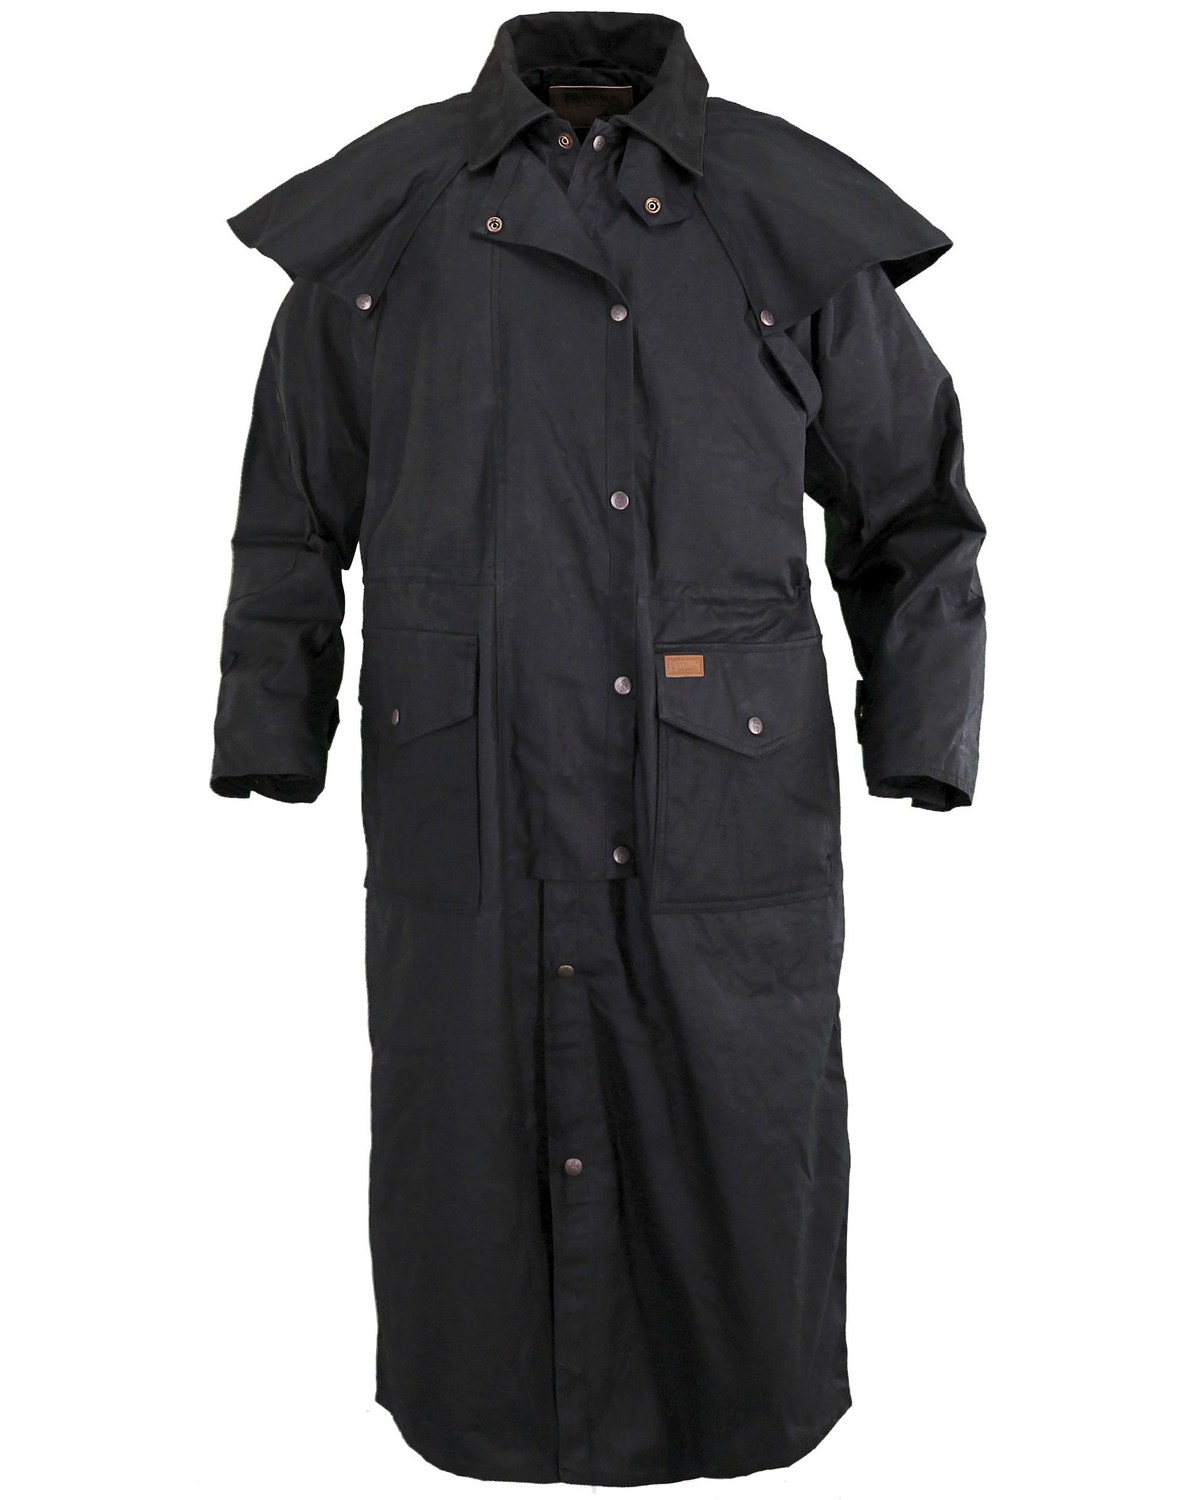 Outback Trading Co. Stockman Waterproof Duster | Boot Barn